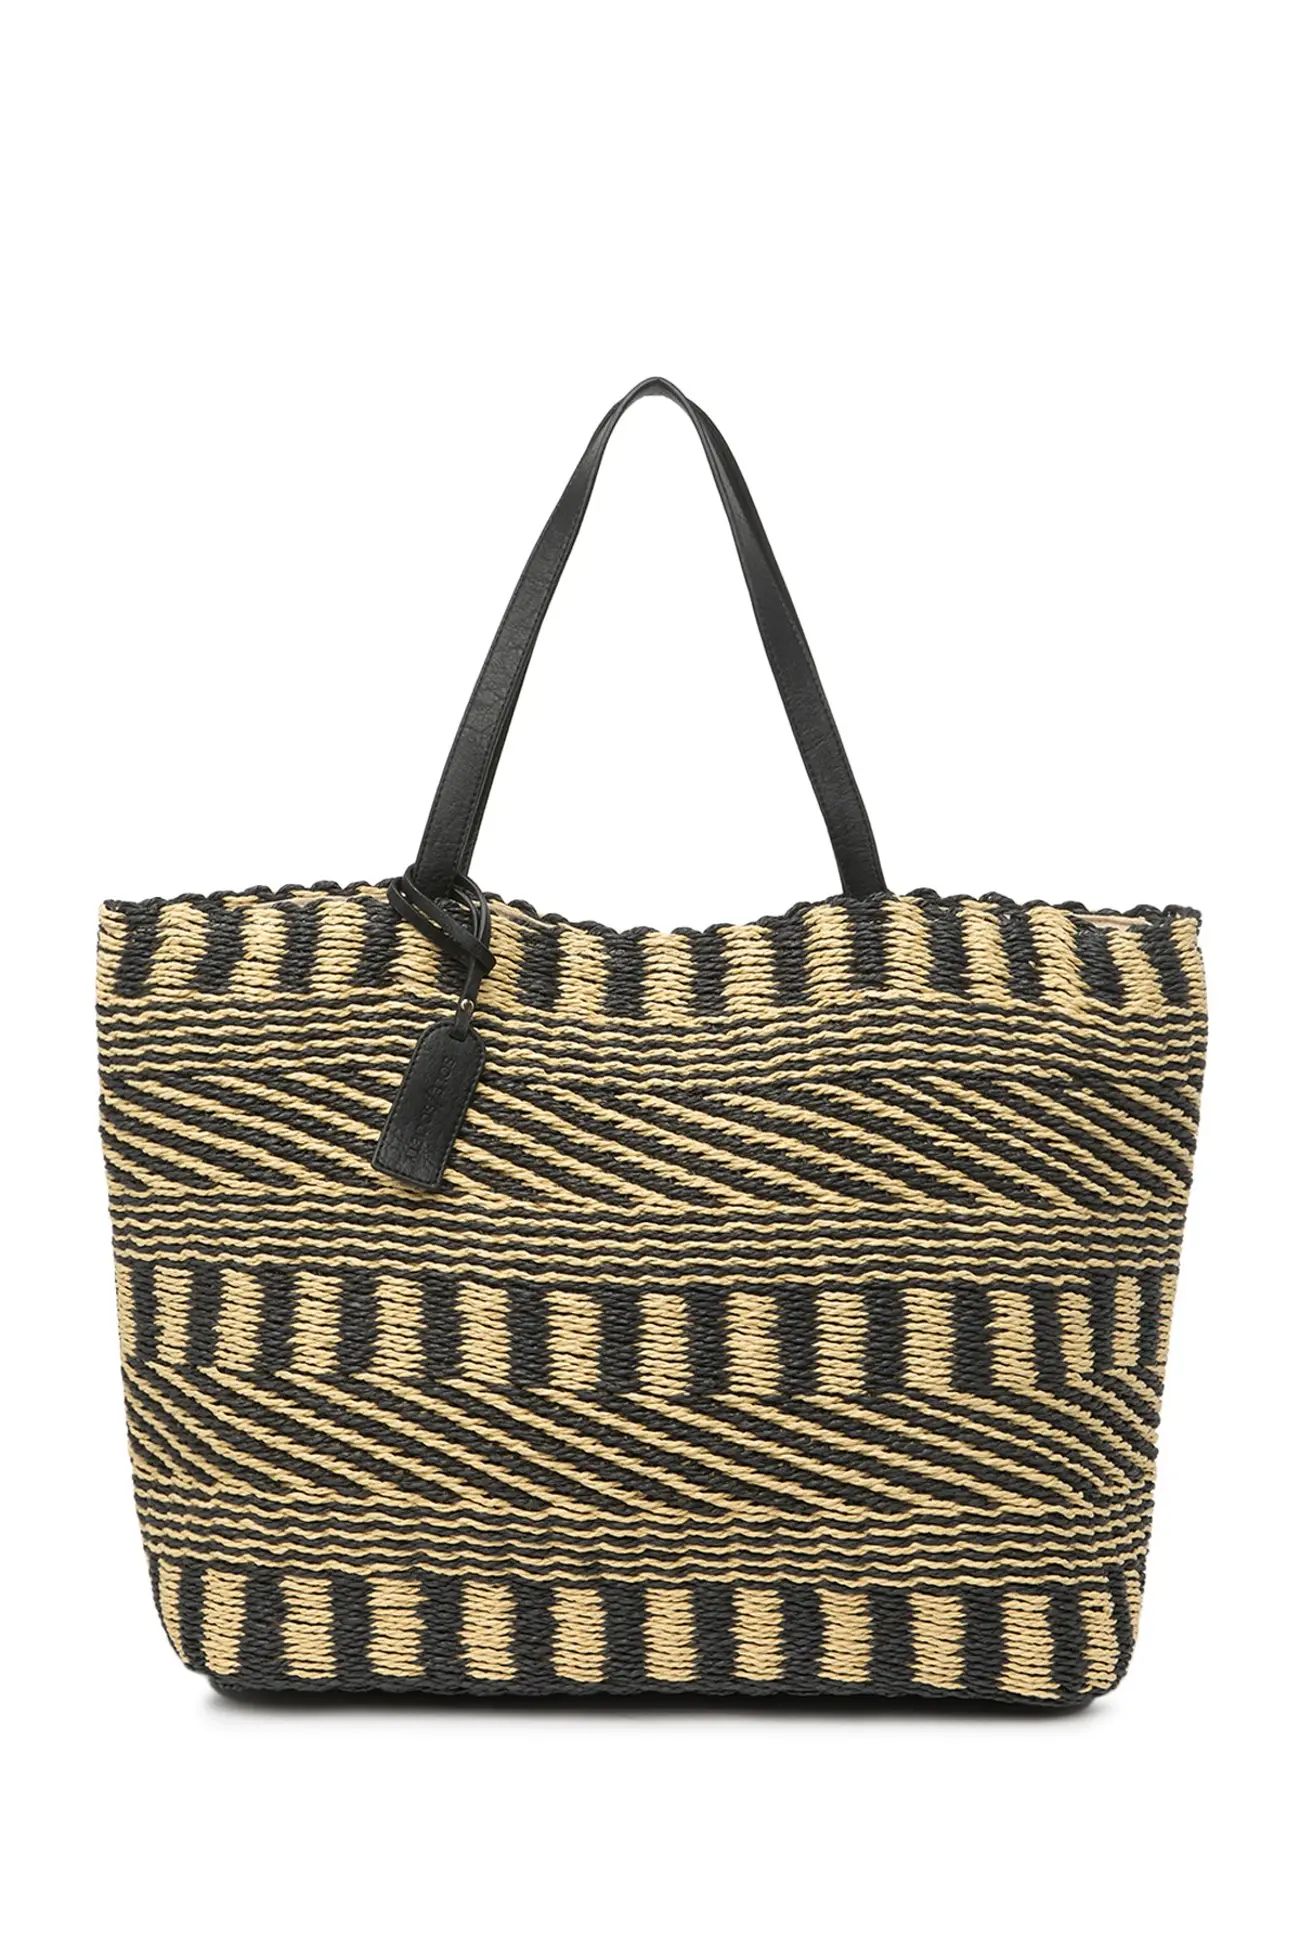 Sole Society | Two Tone Straw Tote | Nordstrom Rack | Nordstrom Rack